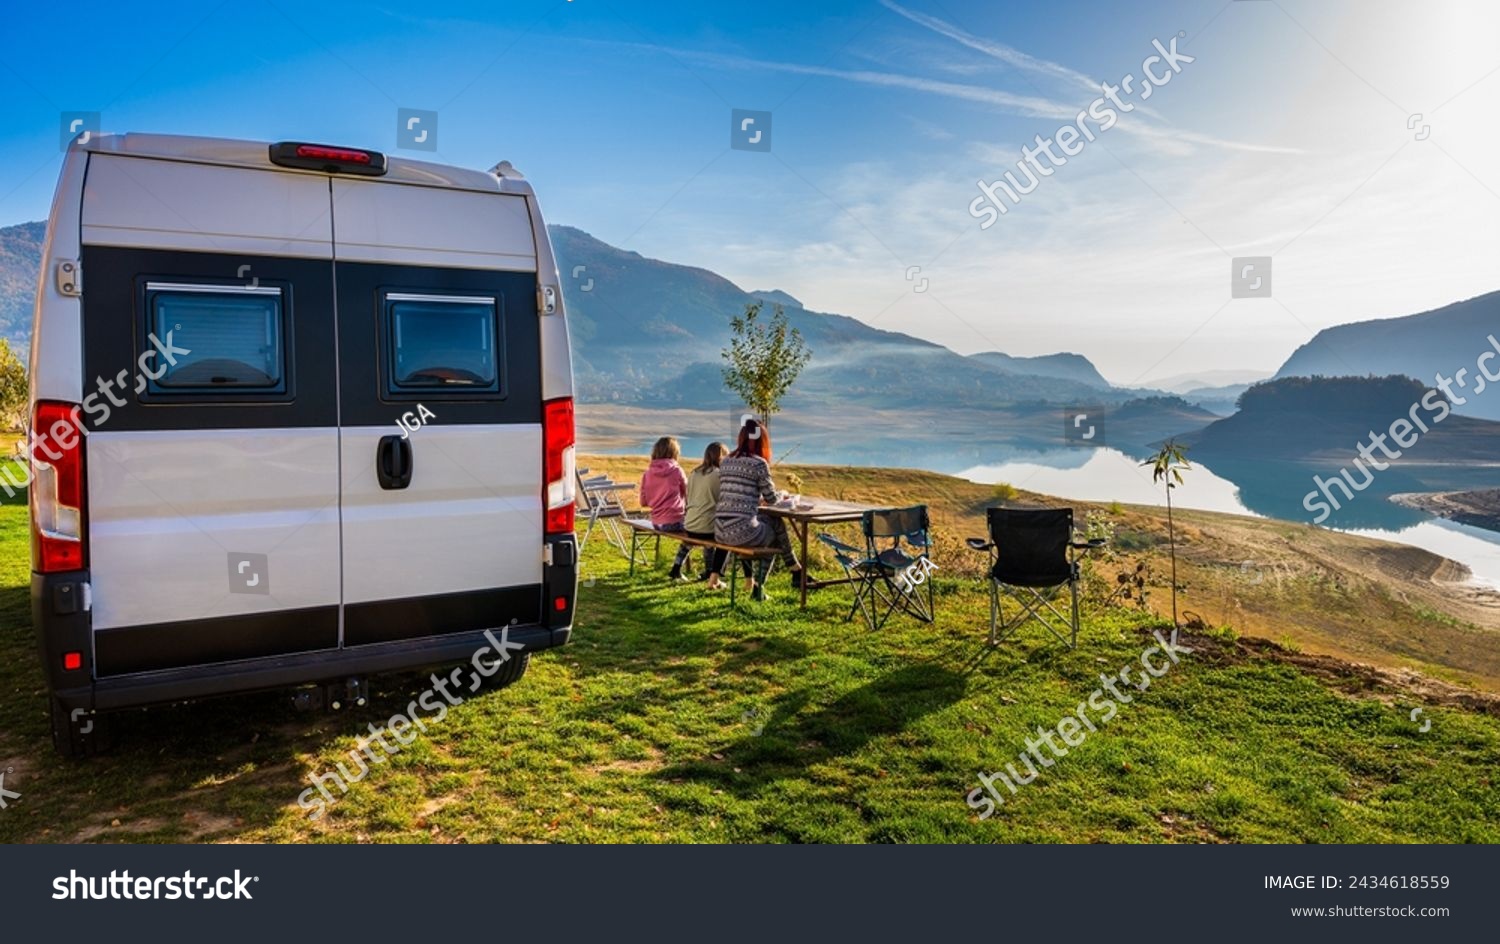 Campervan, Motorhome RV parked next to the lake or river in Bosnia and Herzegovina. Family with camper van or motor home eating breakfast on an active family vacation on a road trip to Ramsko lake. #2434618559